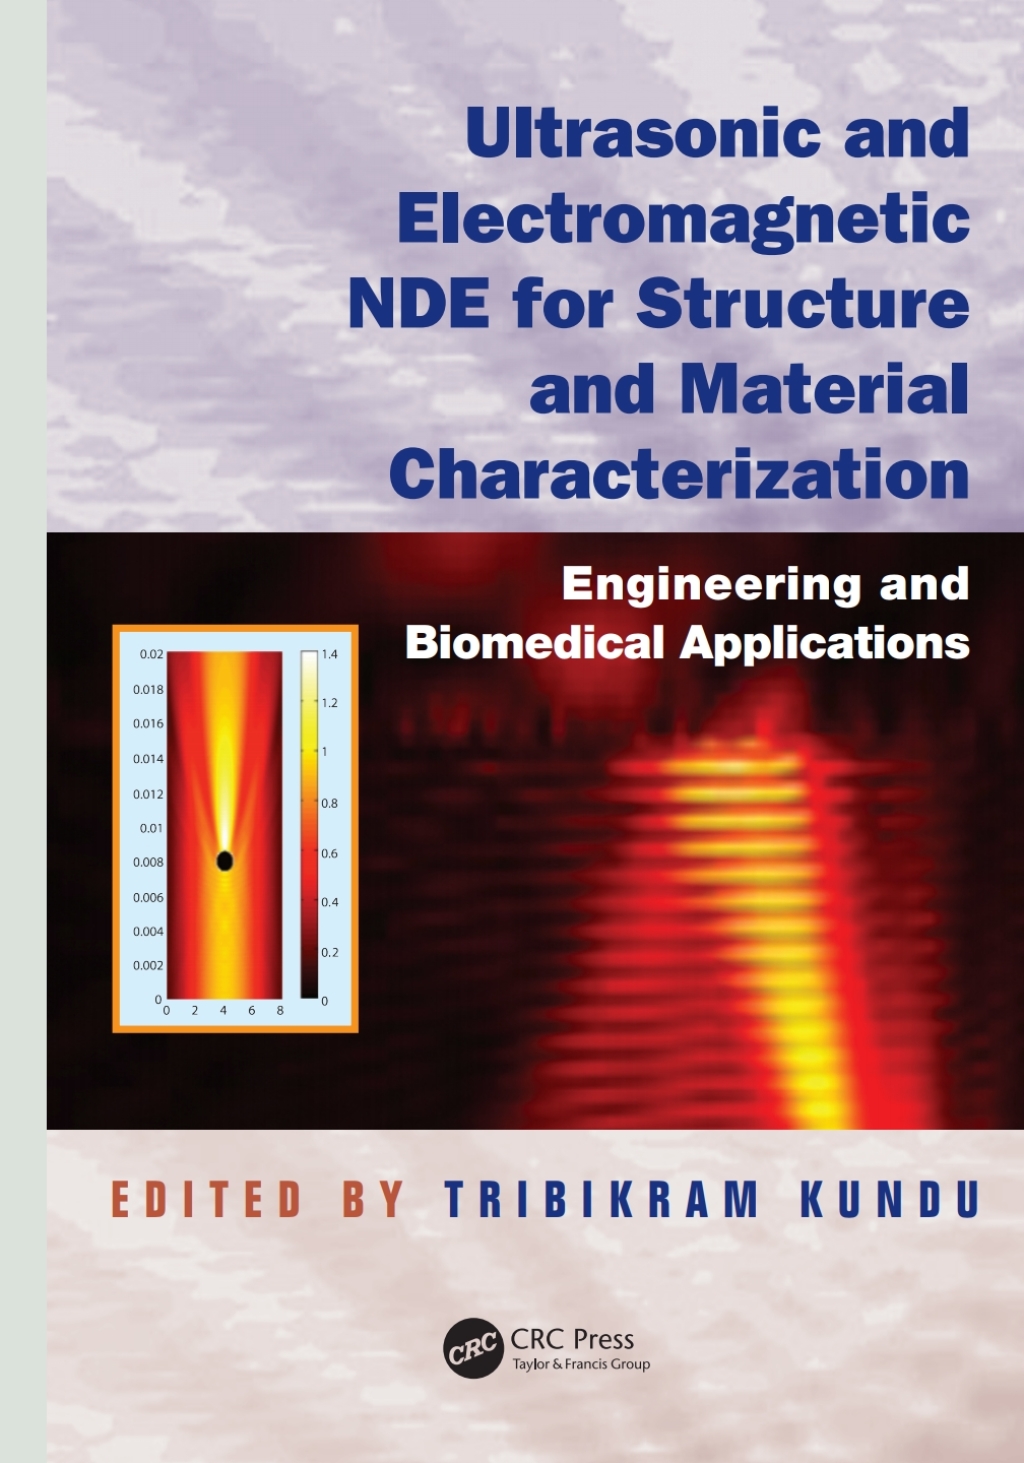 Ultrasonic and Electromagnetic NDE for Structure and Material Characterization (eBook) - Tribikram Kundu